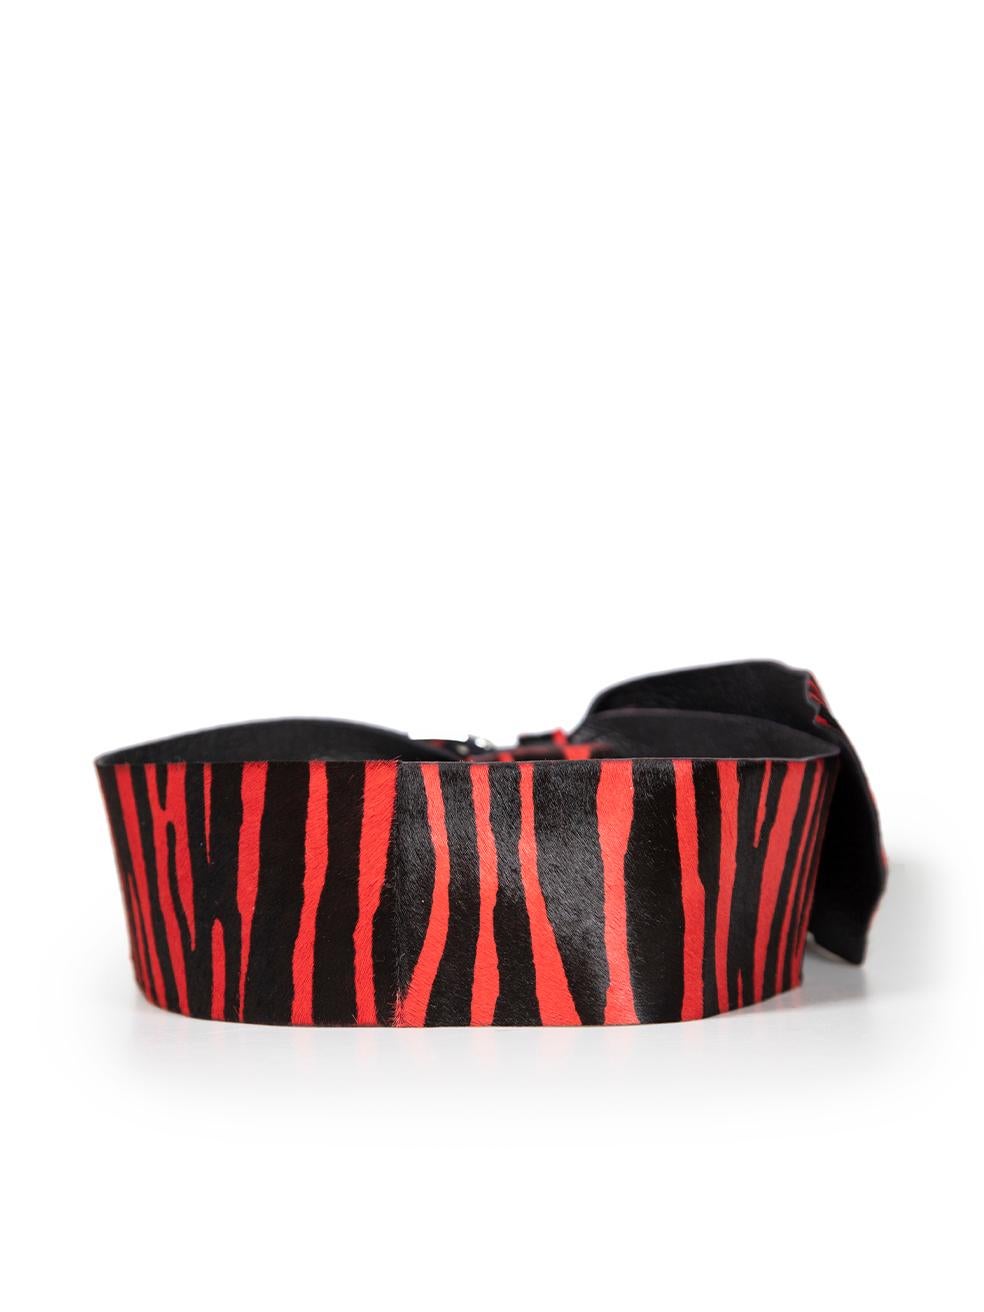 Isabel Marant Red Tiger Print Pony Hair Wide Belt In Excellent Condition For Sale In London, GB